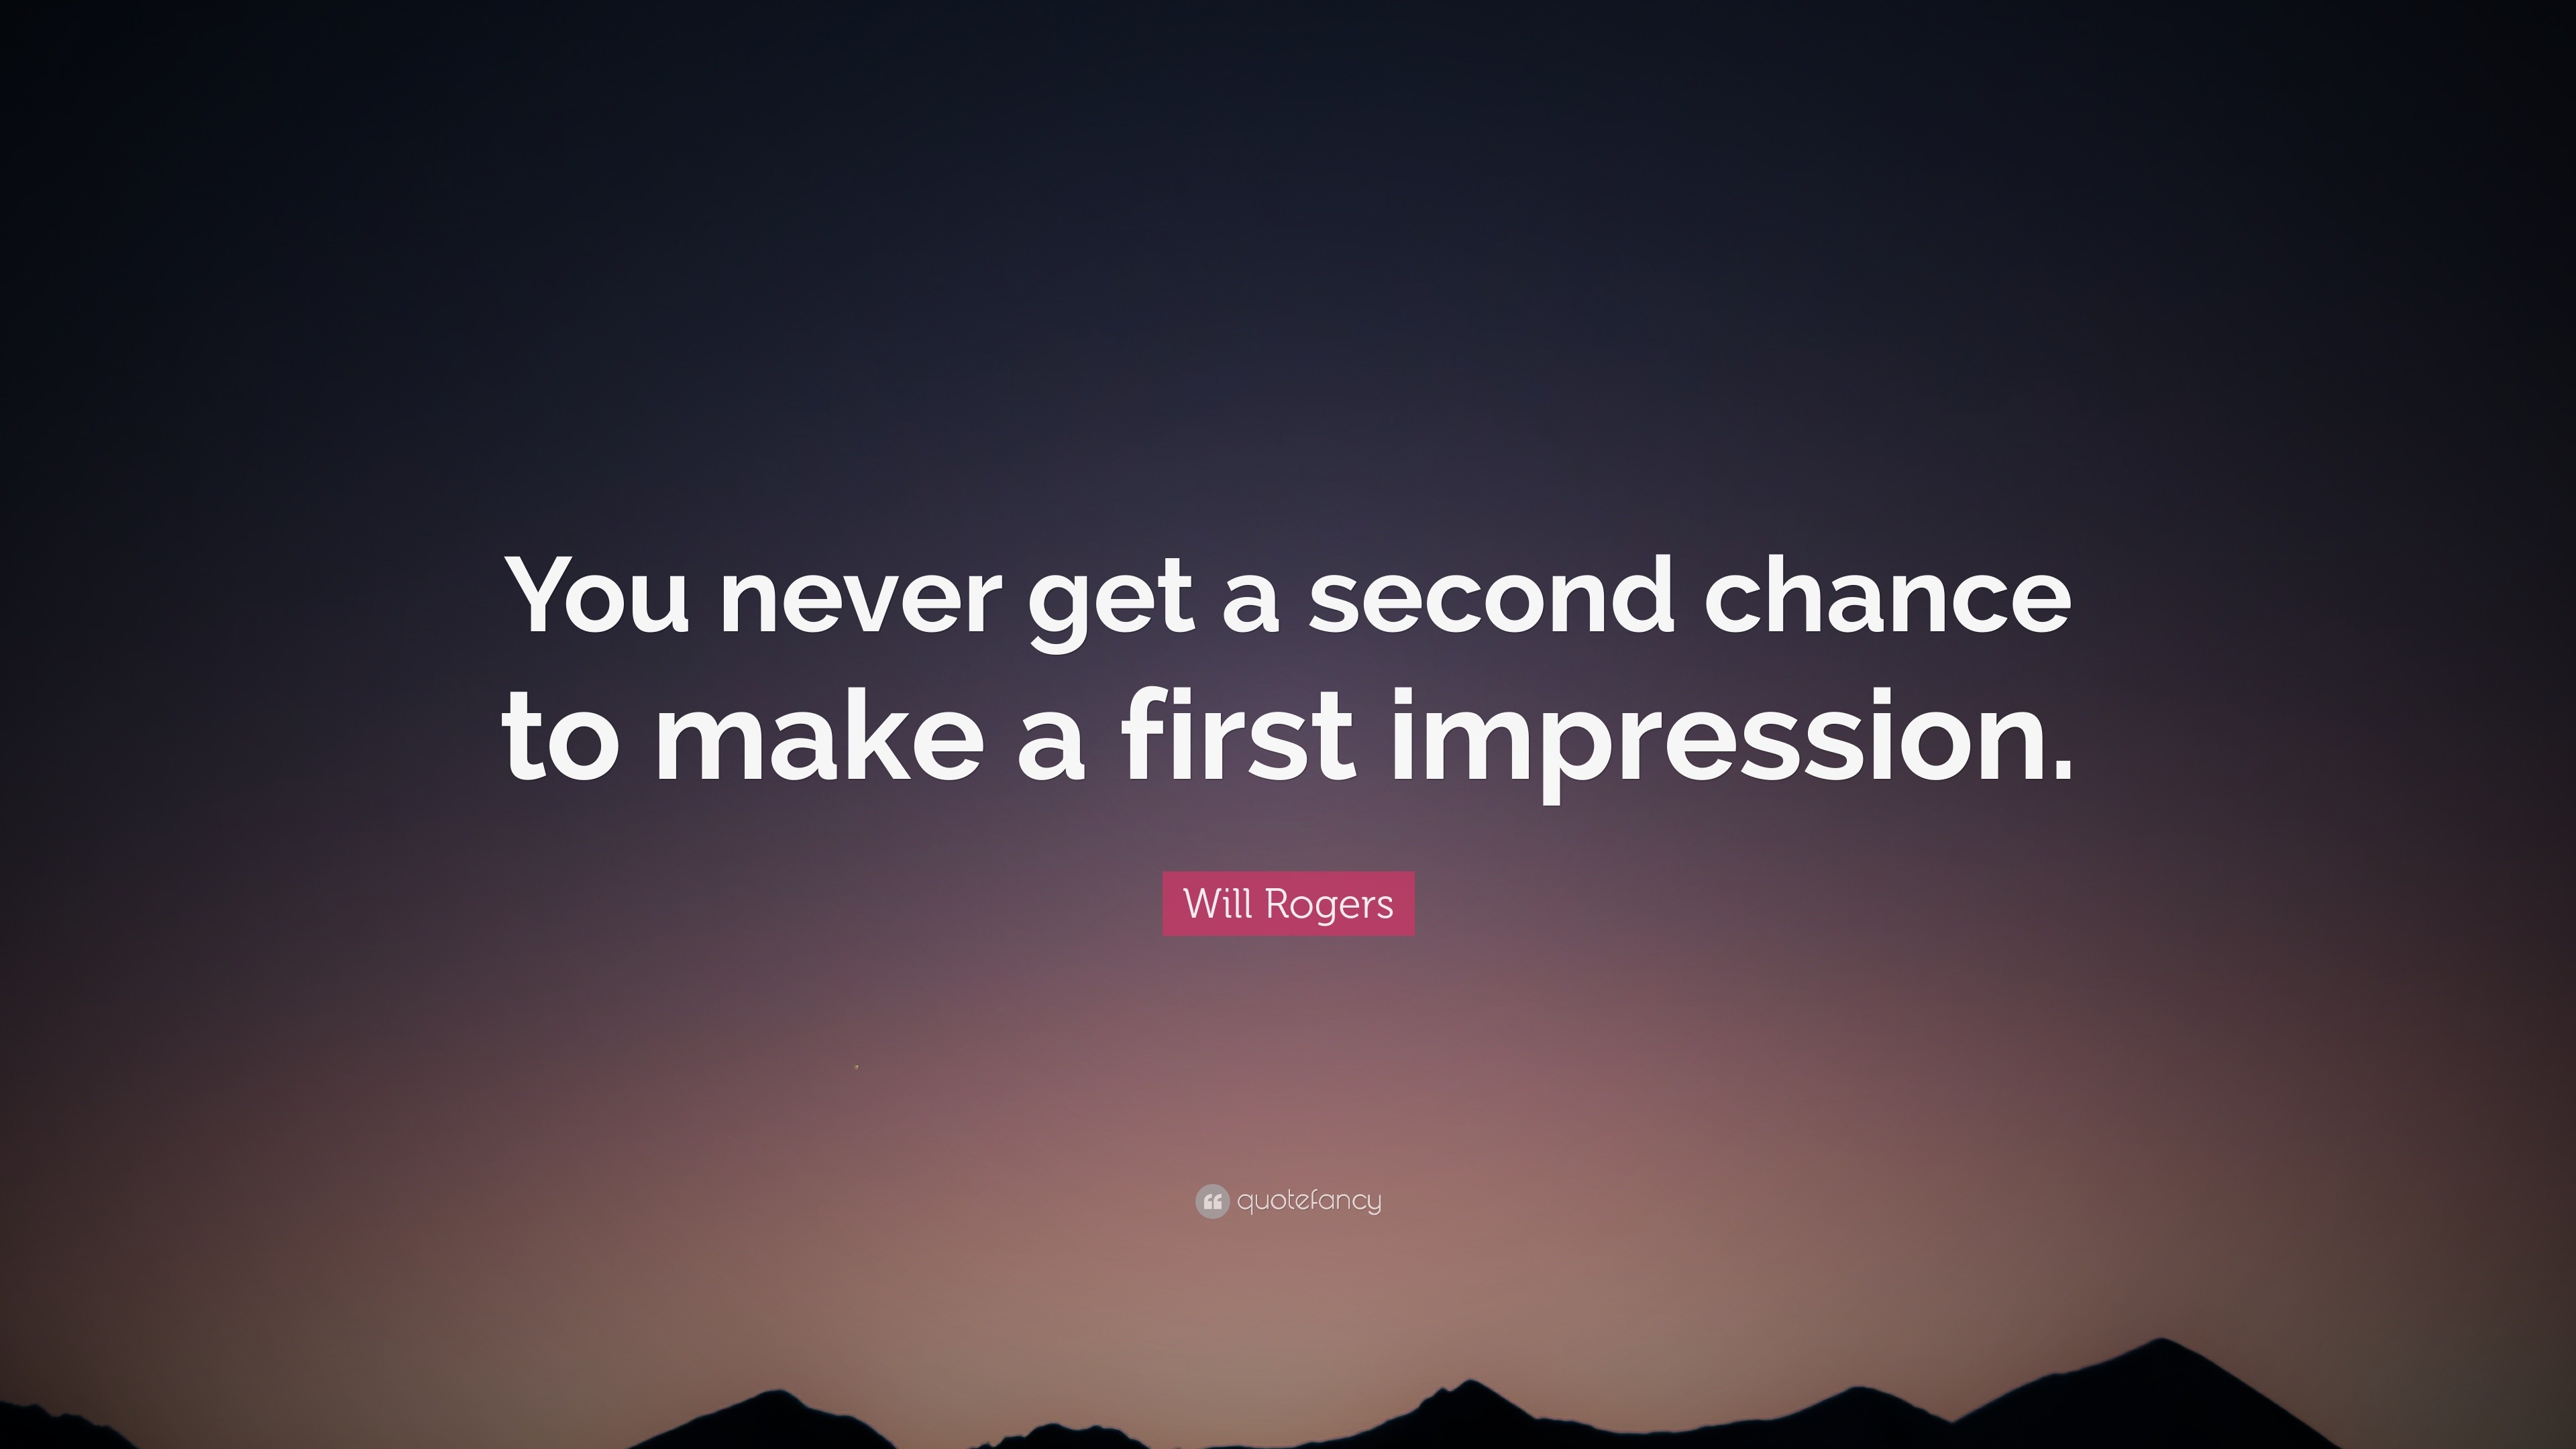 Will Rogers Quote: “You never get a second chance to make a first